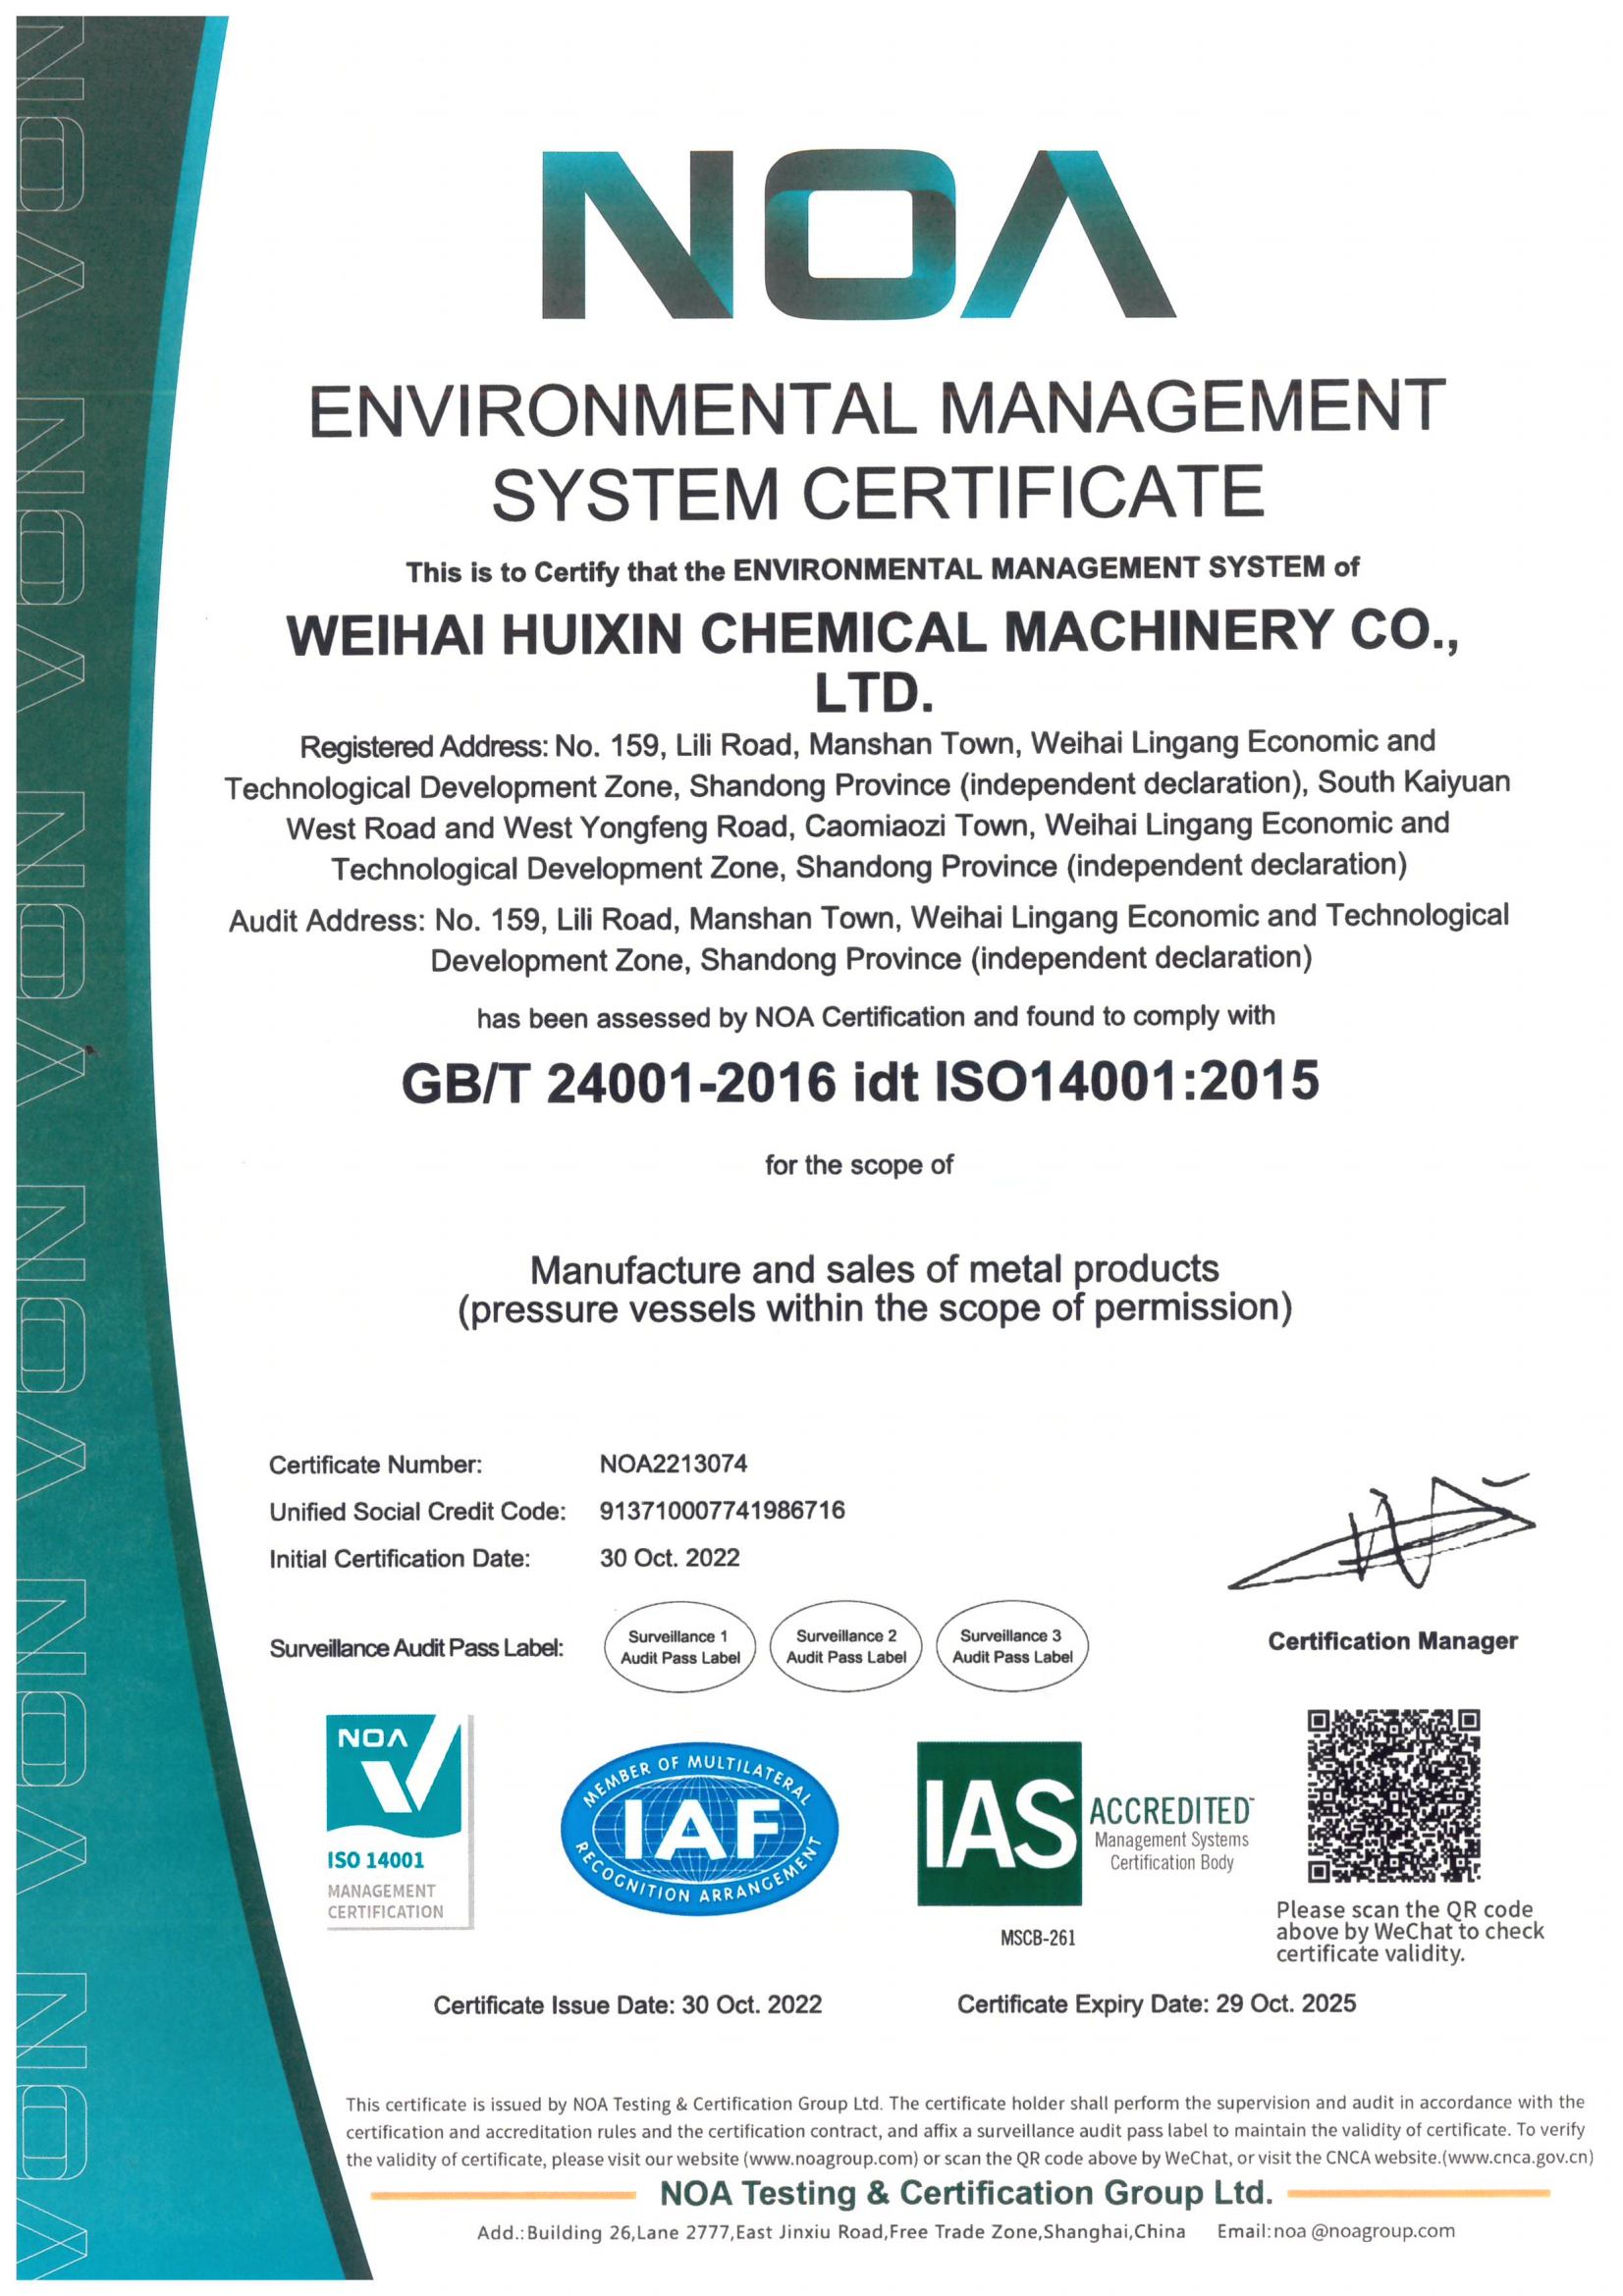 ISO 14001: 2015 Certificate